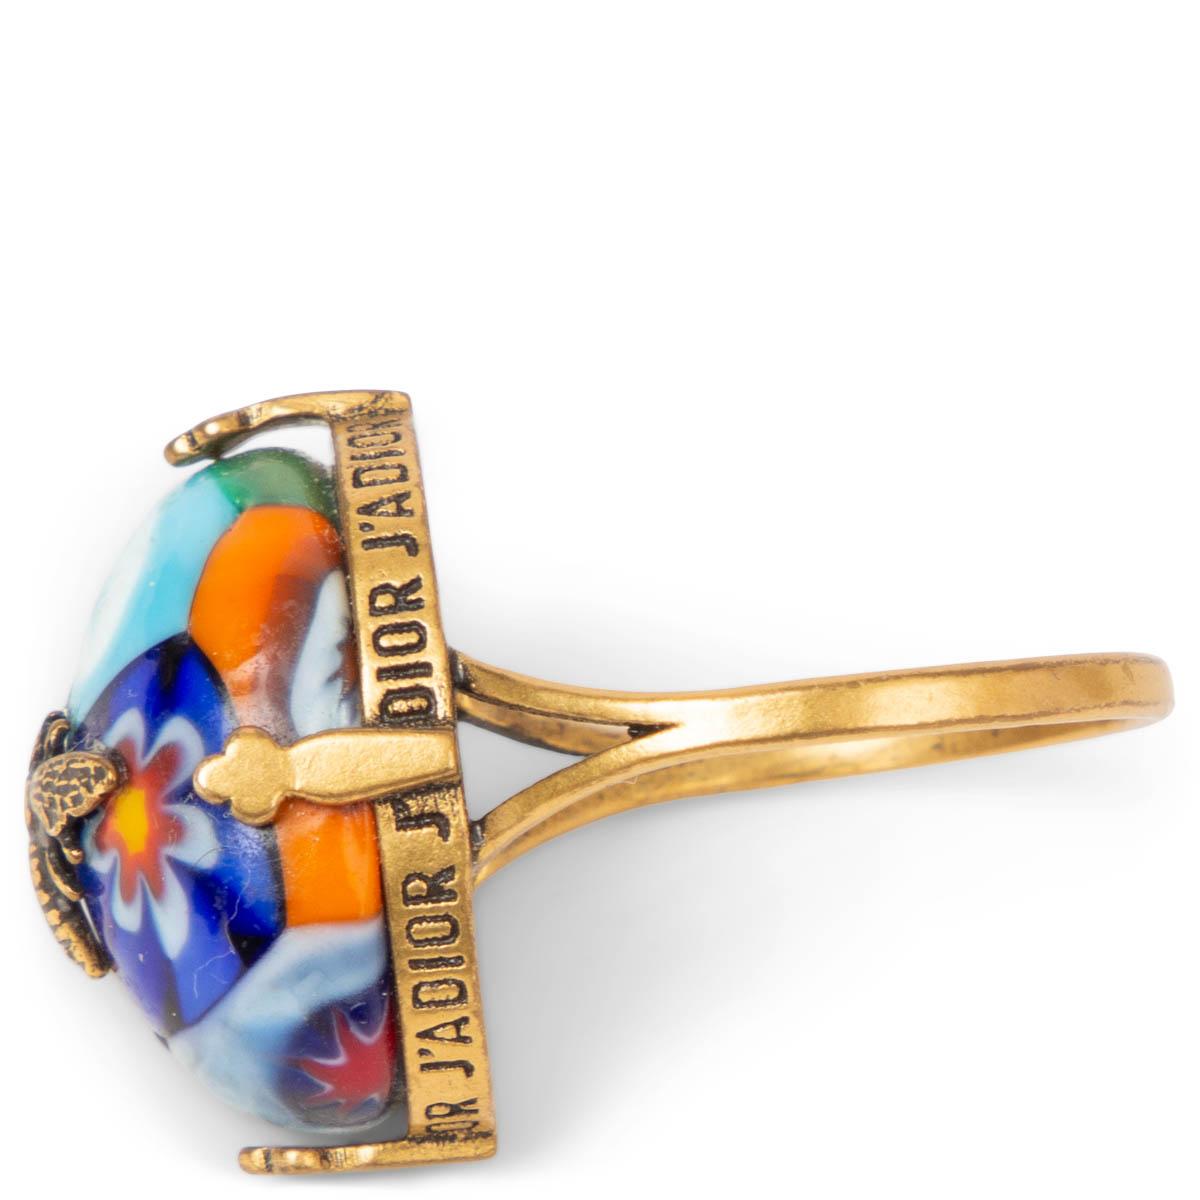 100% authentic Christian Dior D-Murrine ring in multicolored Millefiori Murano glass with aged gold-tone metal bee. Inspired by Nikki de Saint Phalle. Has been worn and is in excellent condition.

Measurements
Width	2cm (0.8in)

All our listings